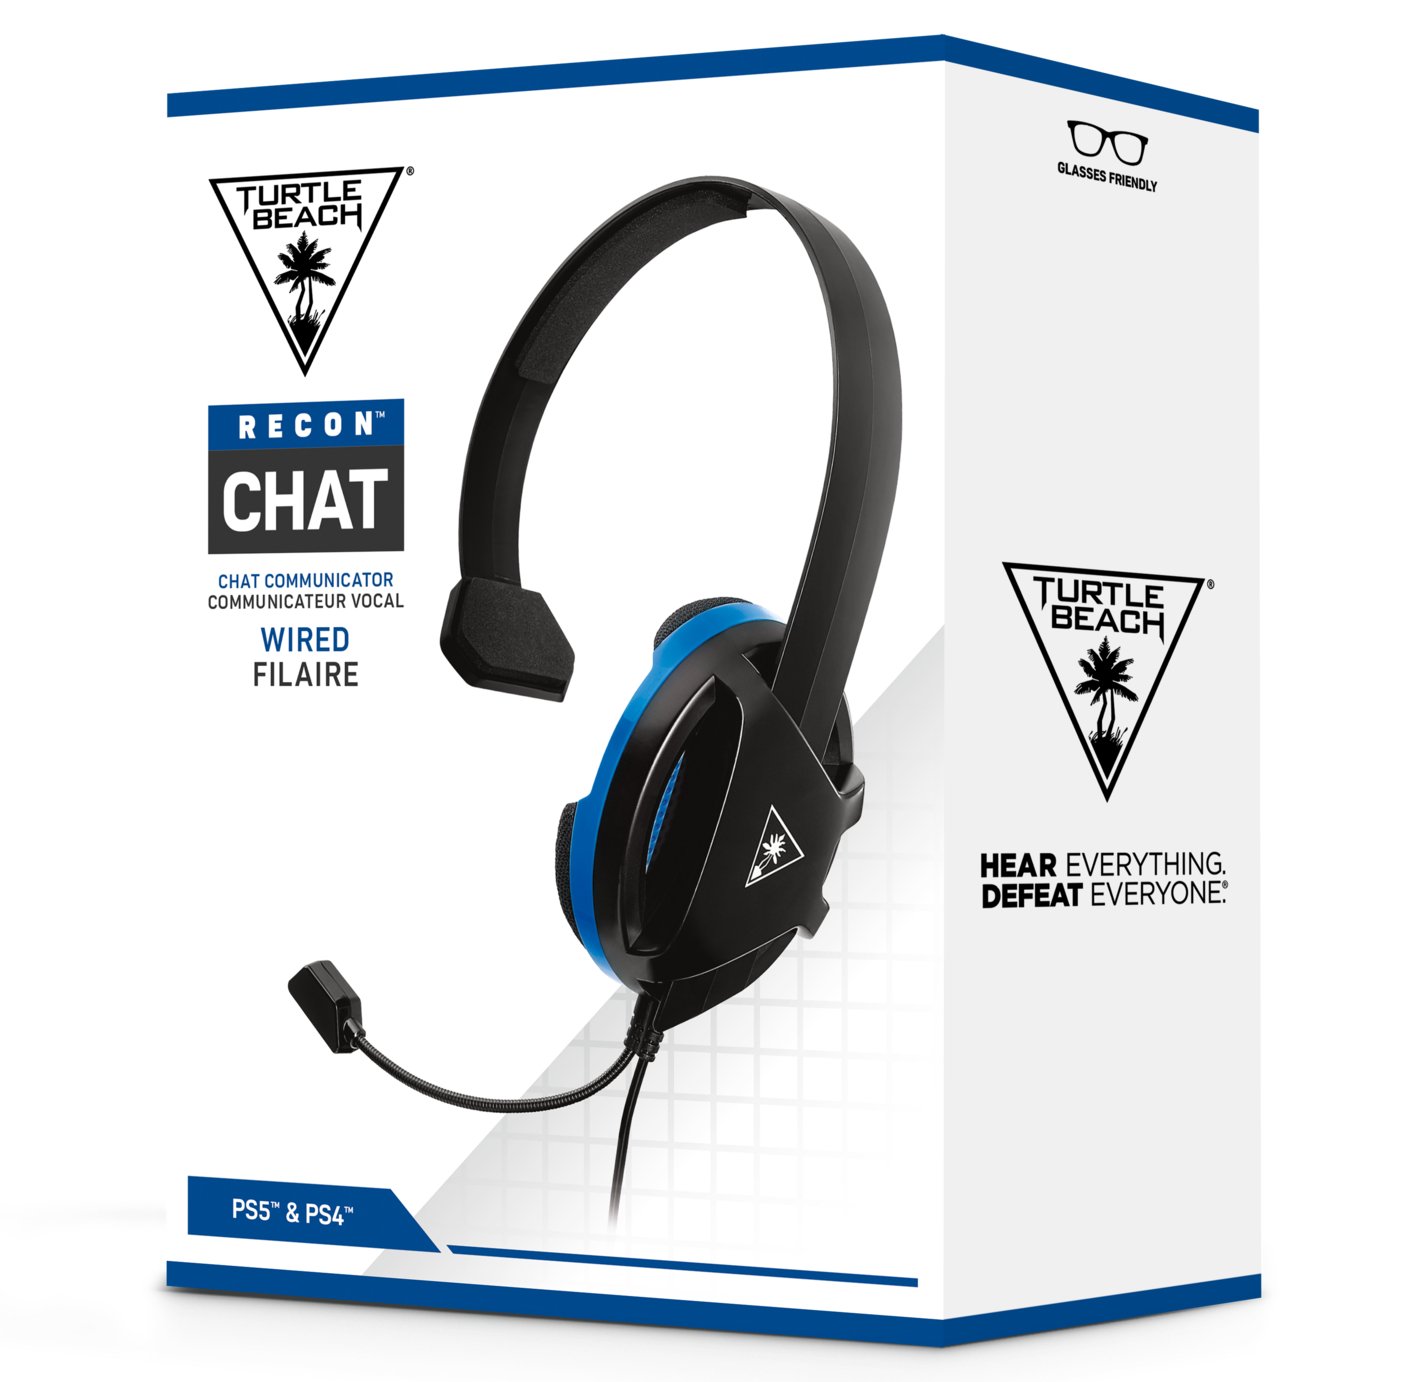 Turtle Beach Recon Chat PS5, PS4, Xbox, PC Headset Review